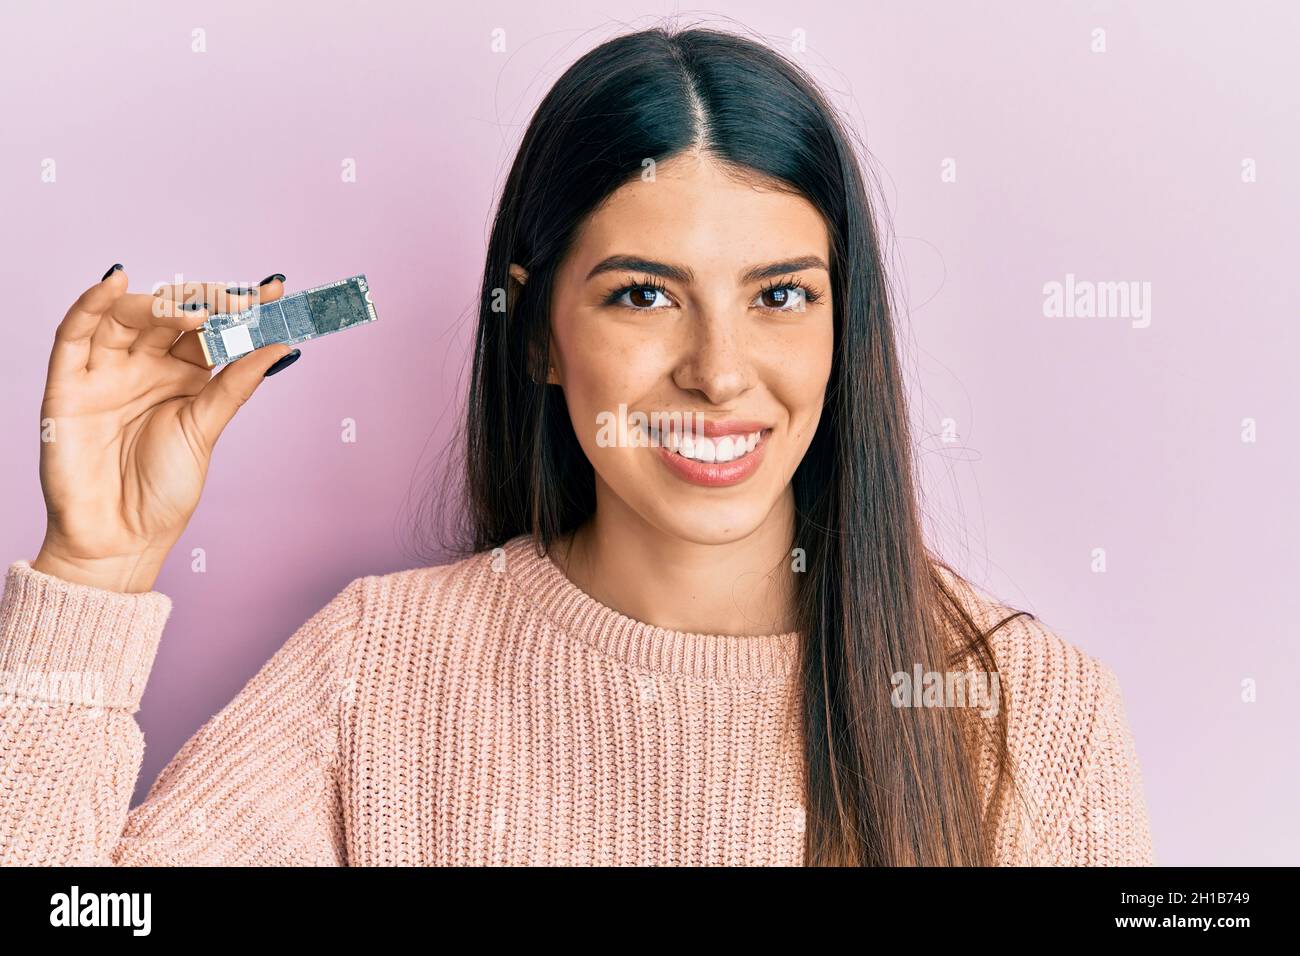 Young hispanic woman holding computer memory looking positive and happy standing and smiling with a confident smile showing teeth Stock Photo